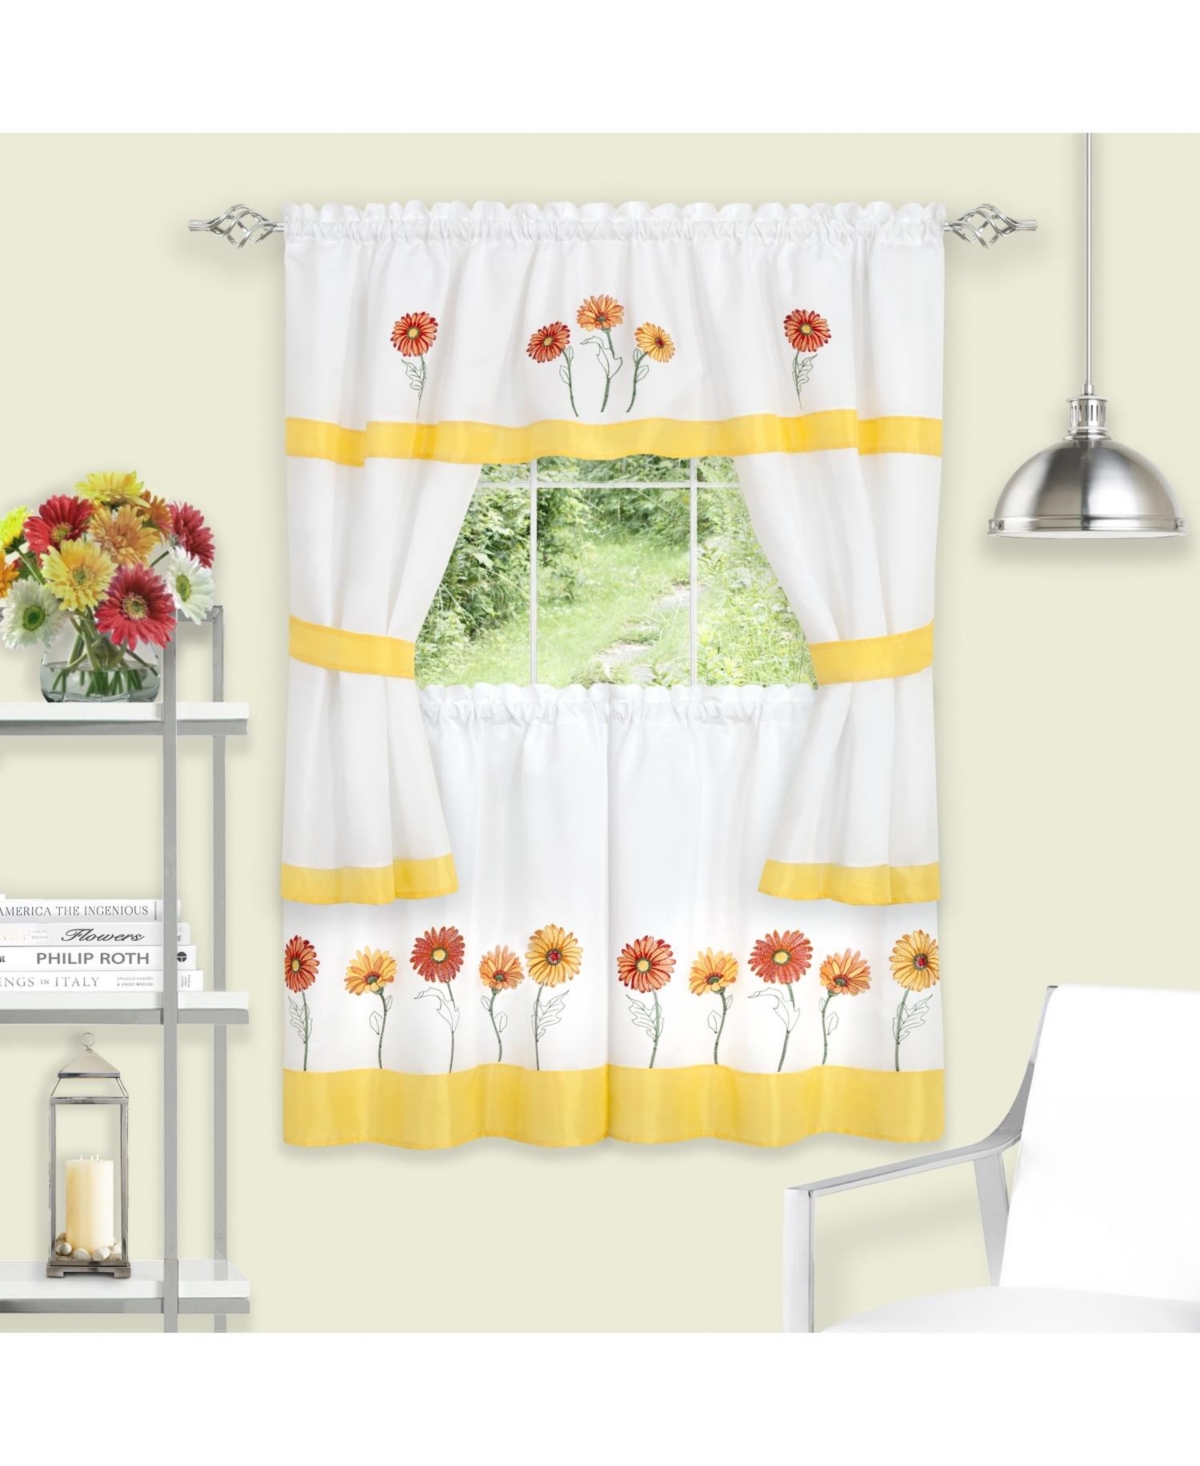 Montauk Accents Embroidered Sunflowers & Daisies Complete 5 Piece Cottage Kitchen Curtain Tier & Valance Set - Yellow